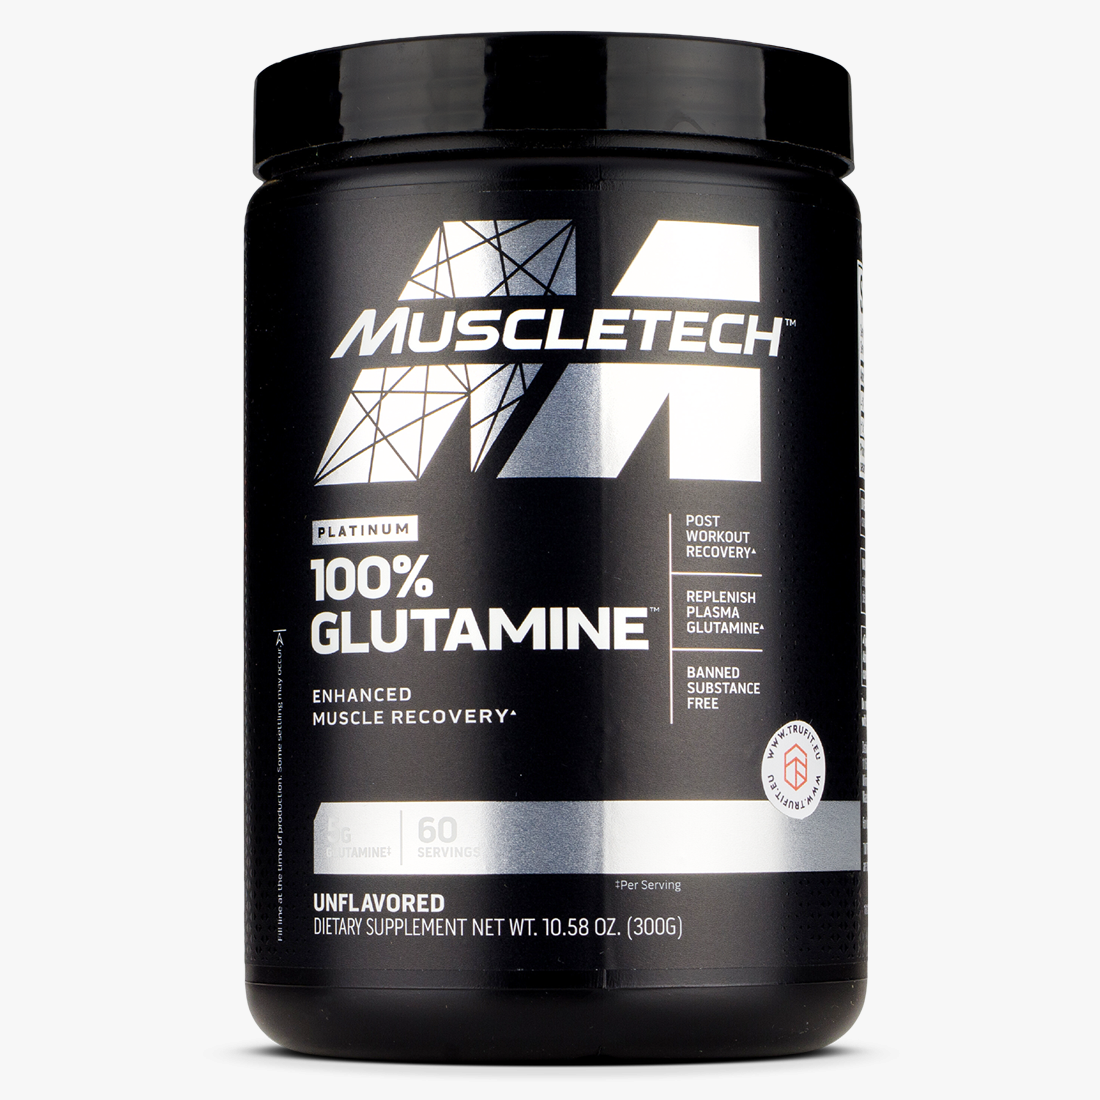 Glutamine and recovery